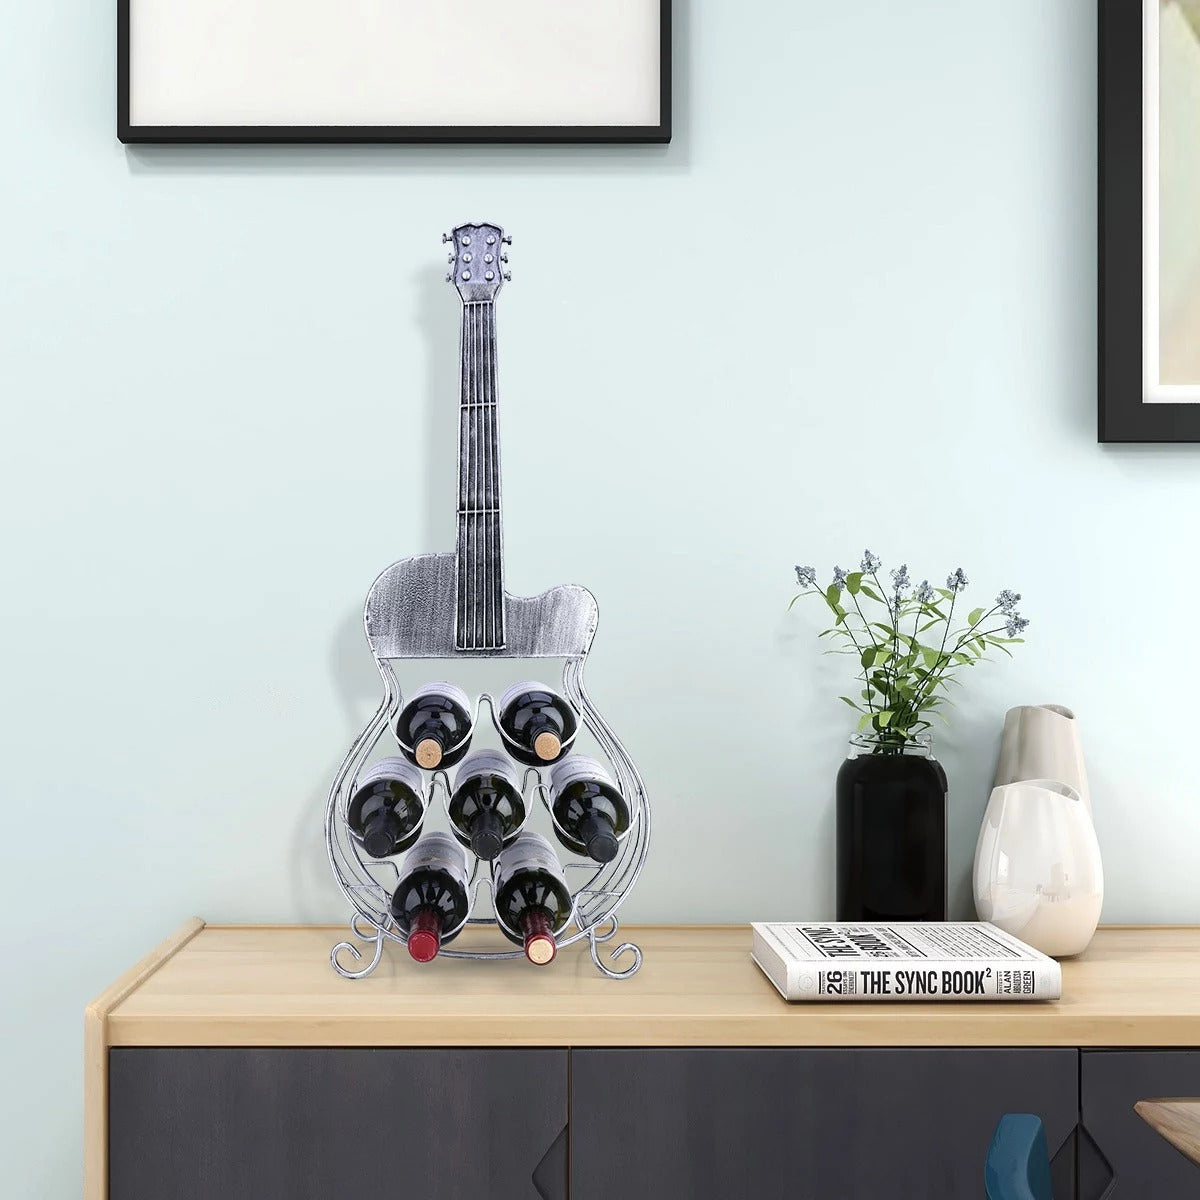 Guitar Wine Rack to 7 Bottle Wine Decorative Holder or Gifts For Wine Lovers and Music Lovers